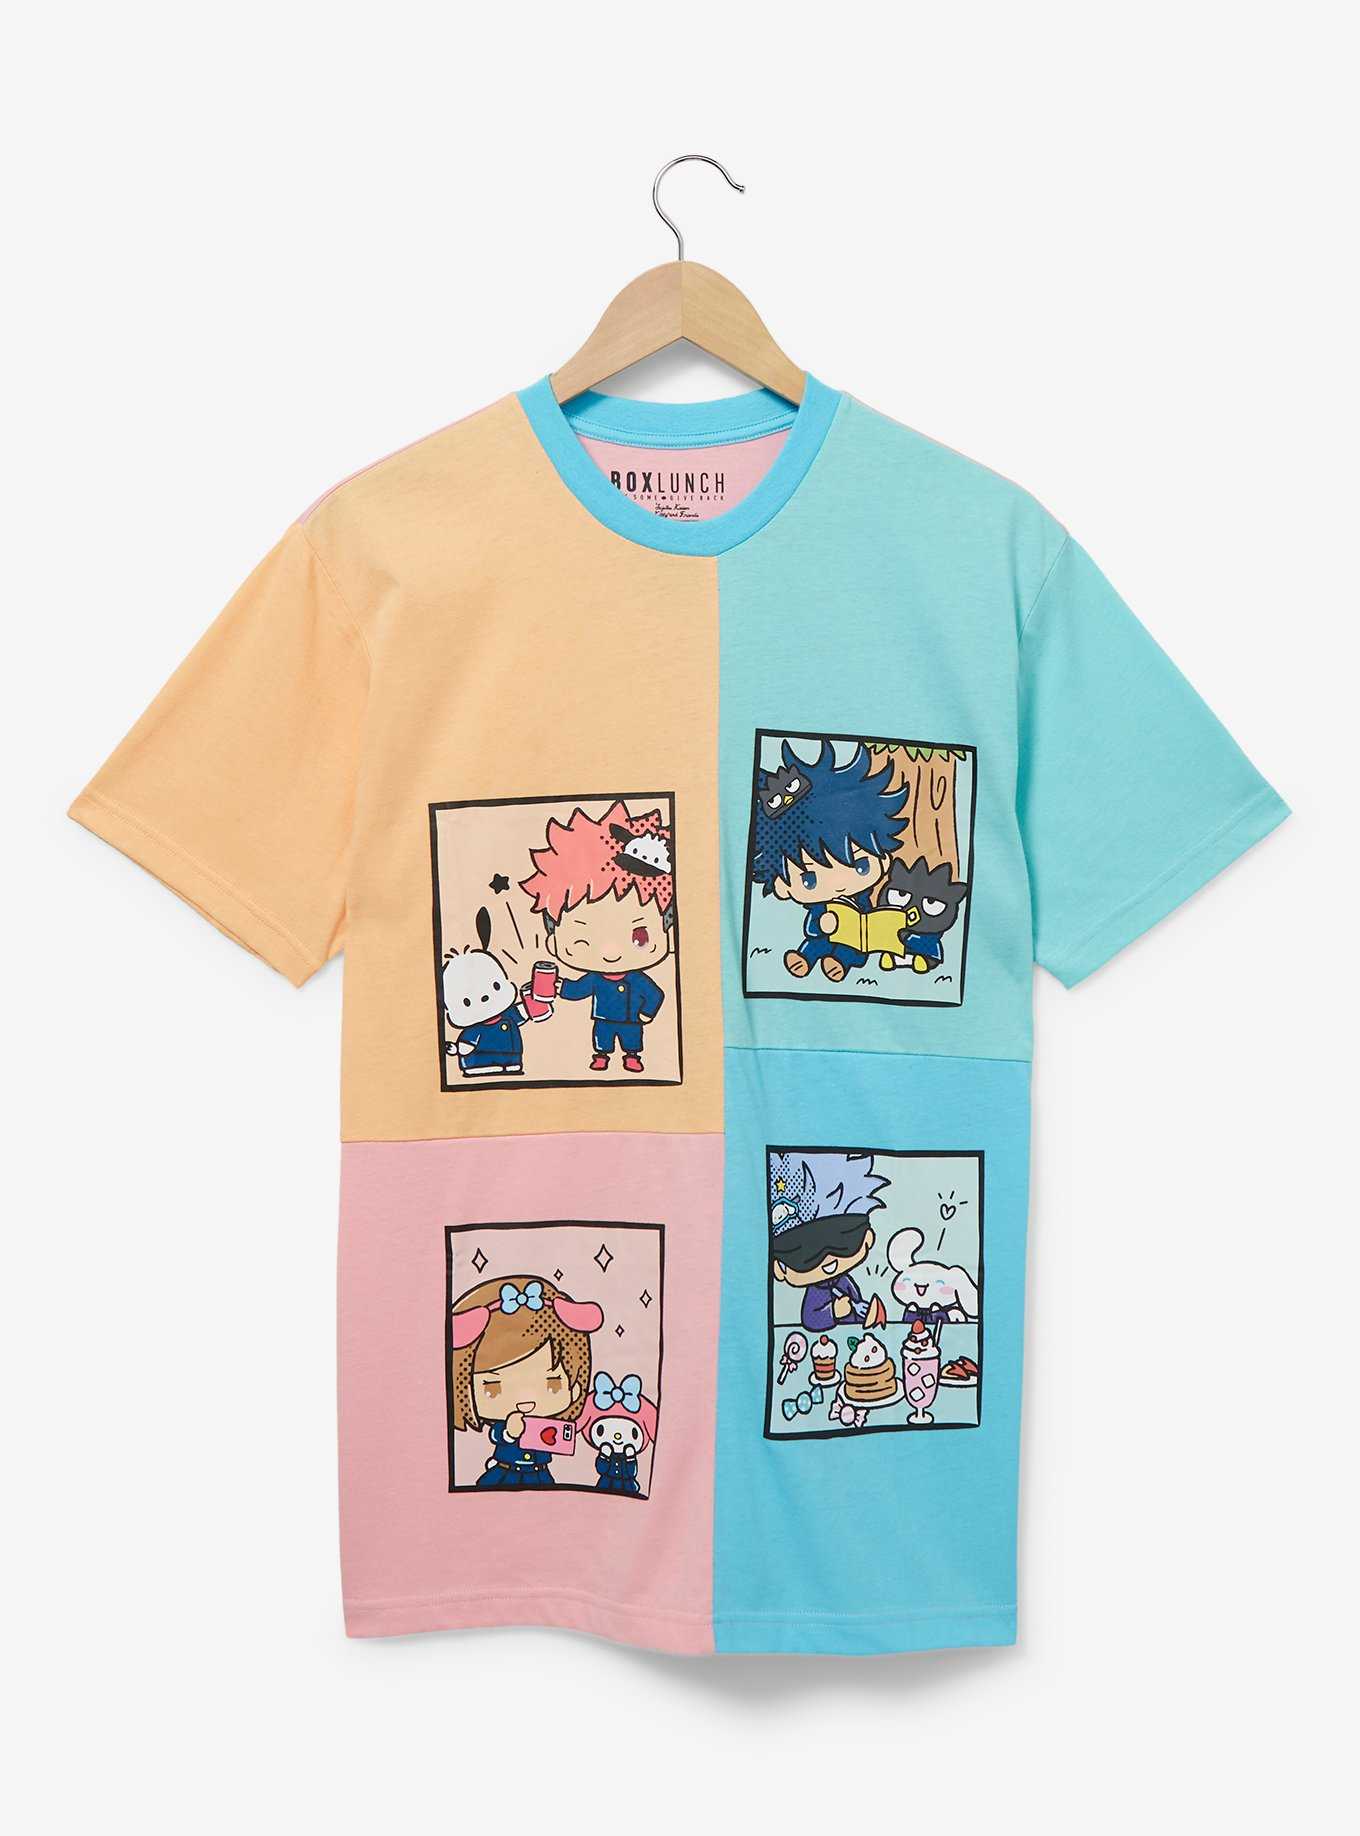 Jujutsu Kaisen x Hello Kitty and Friends Colorblock Character Portraits T-Shirt - BoxLunch Exclusive, , hi-res